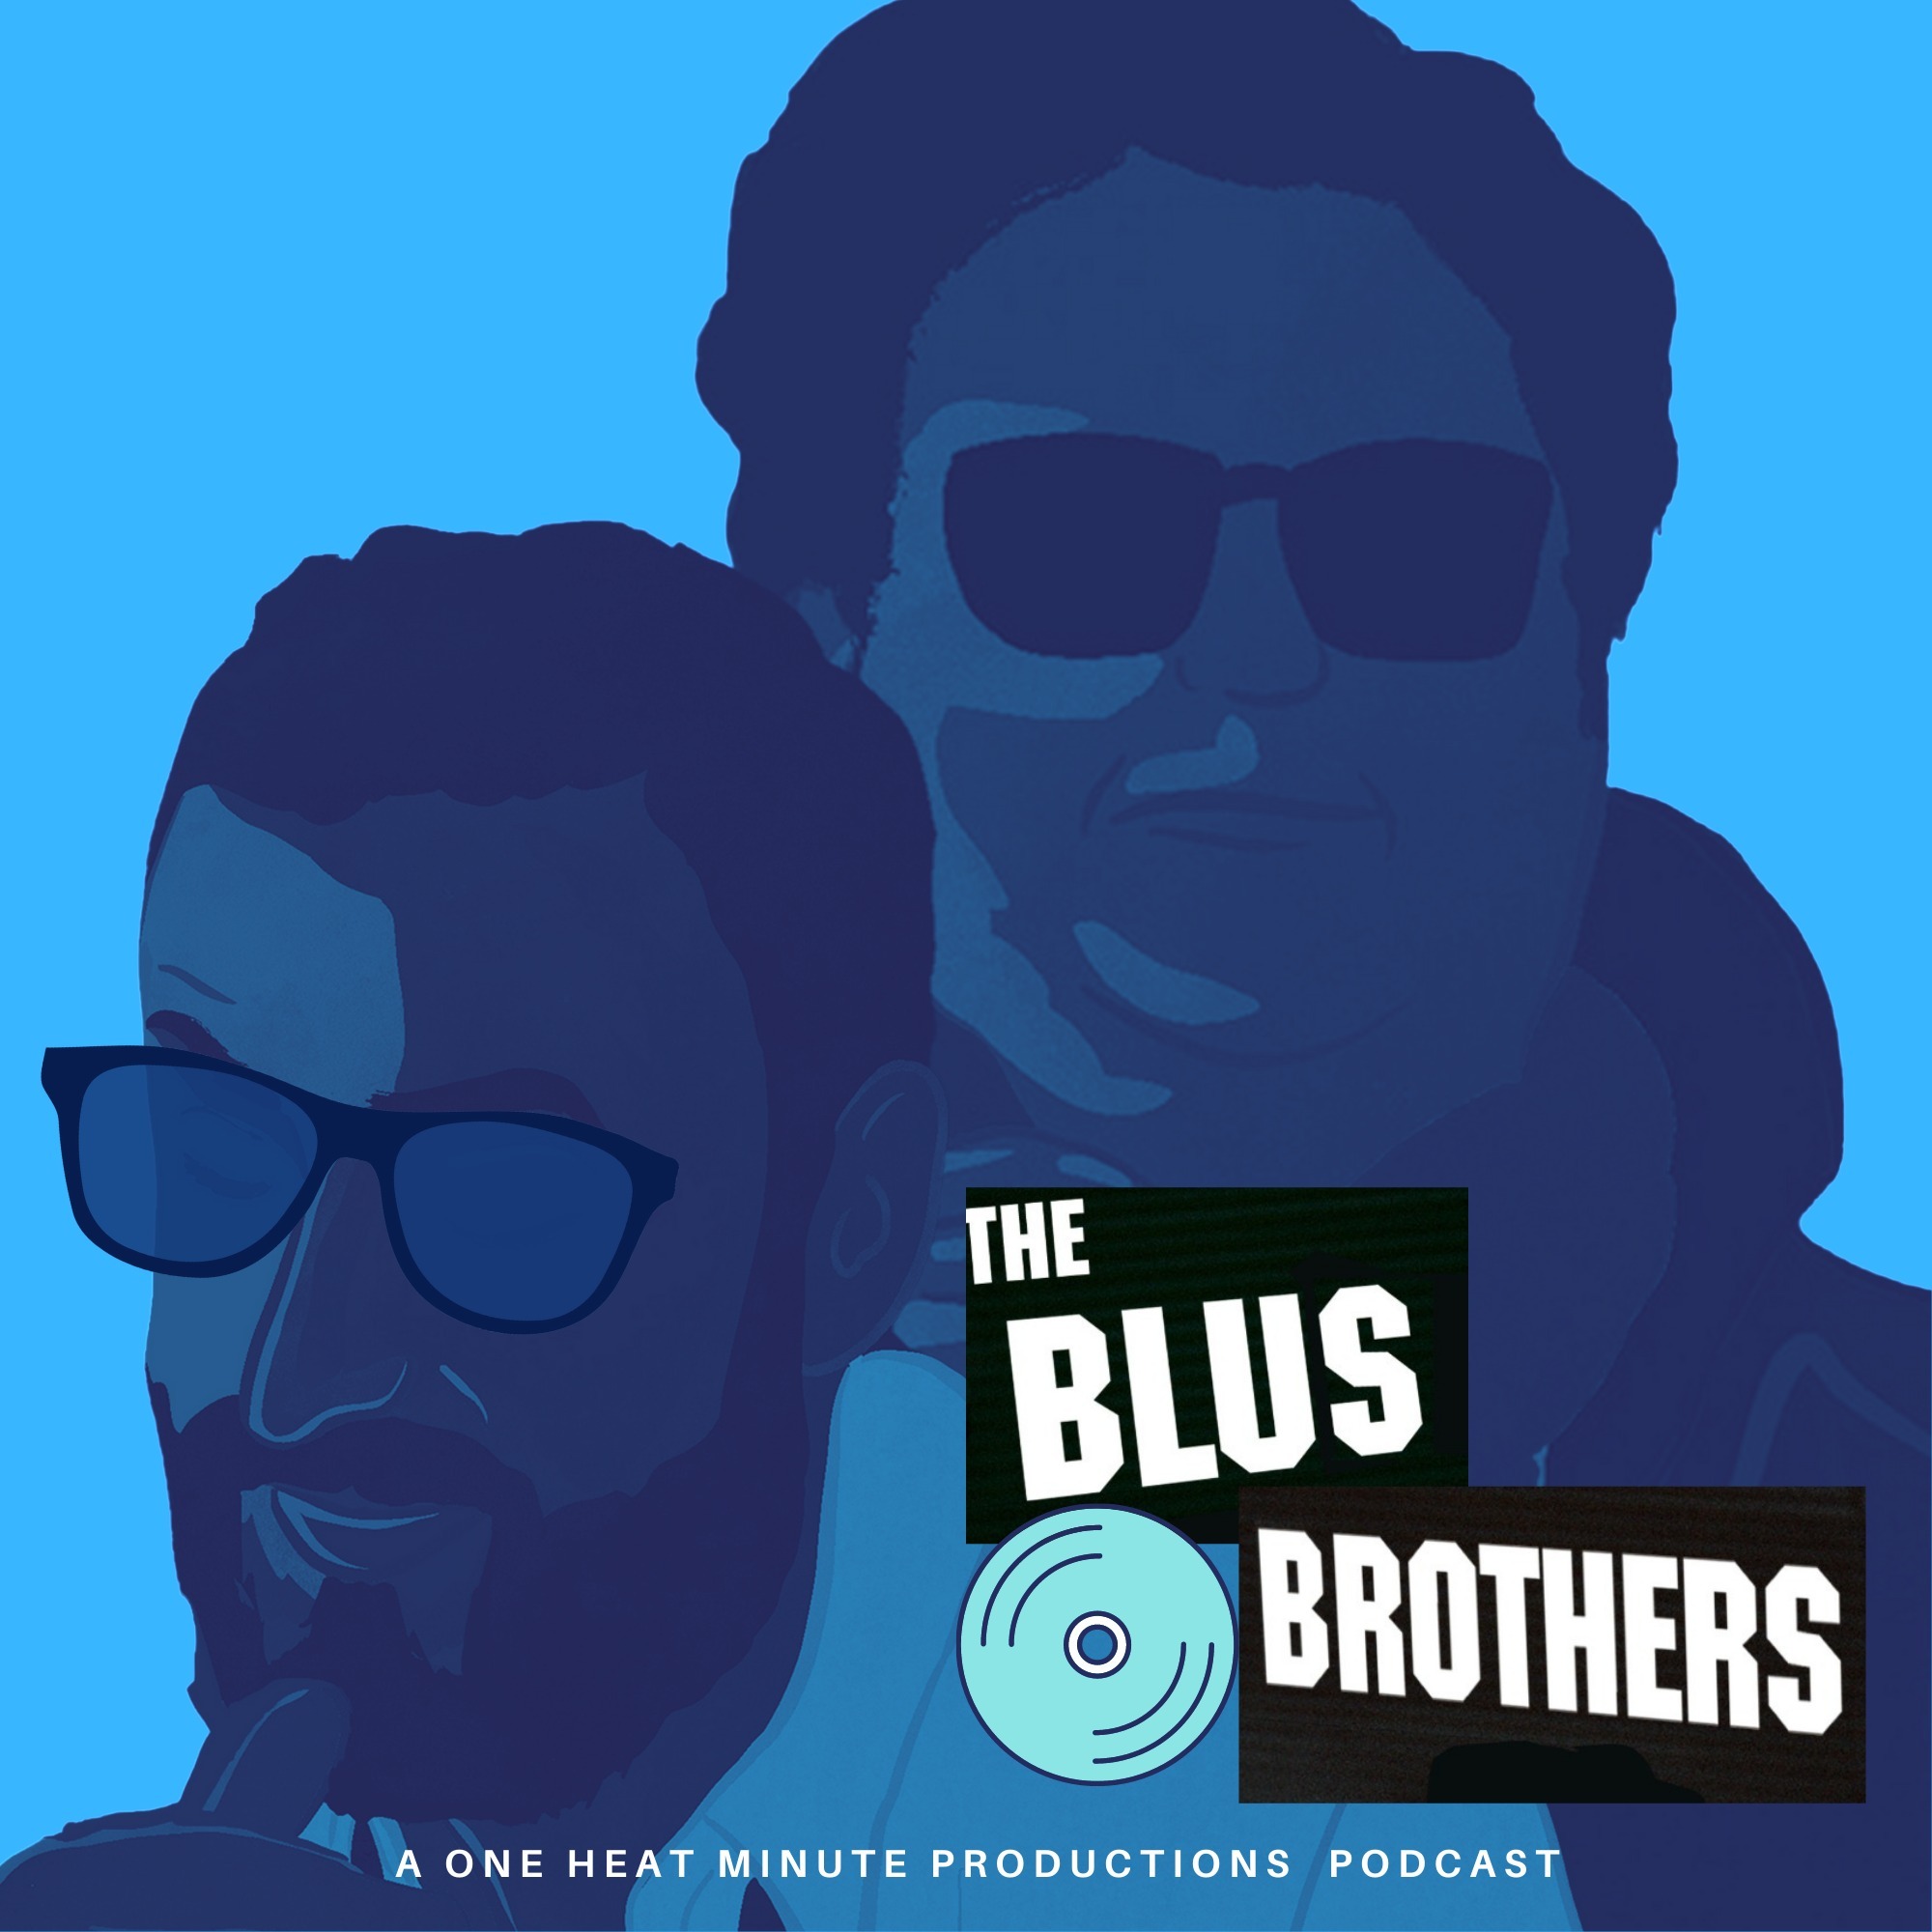 THE BLUS BROTHERS: IMPRINT FILMS - A NIGHT TO REMEMBER + DAMN THE DEFIANT! + THE LONG SHIPS